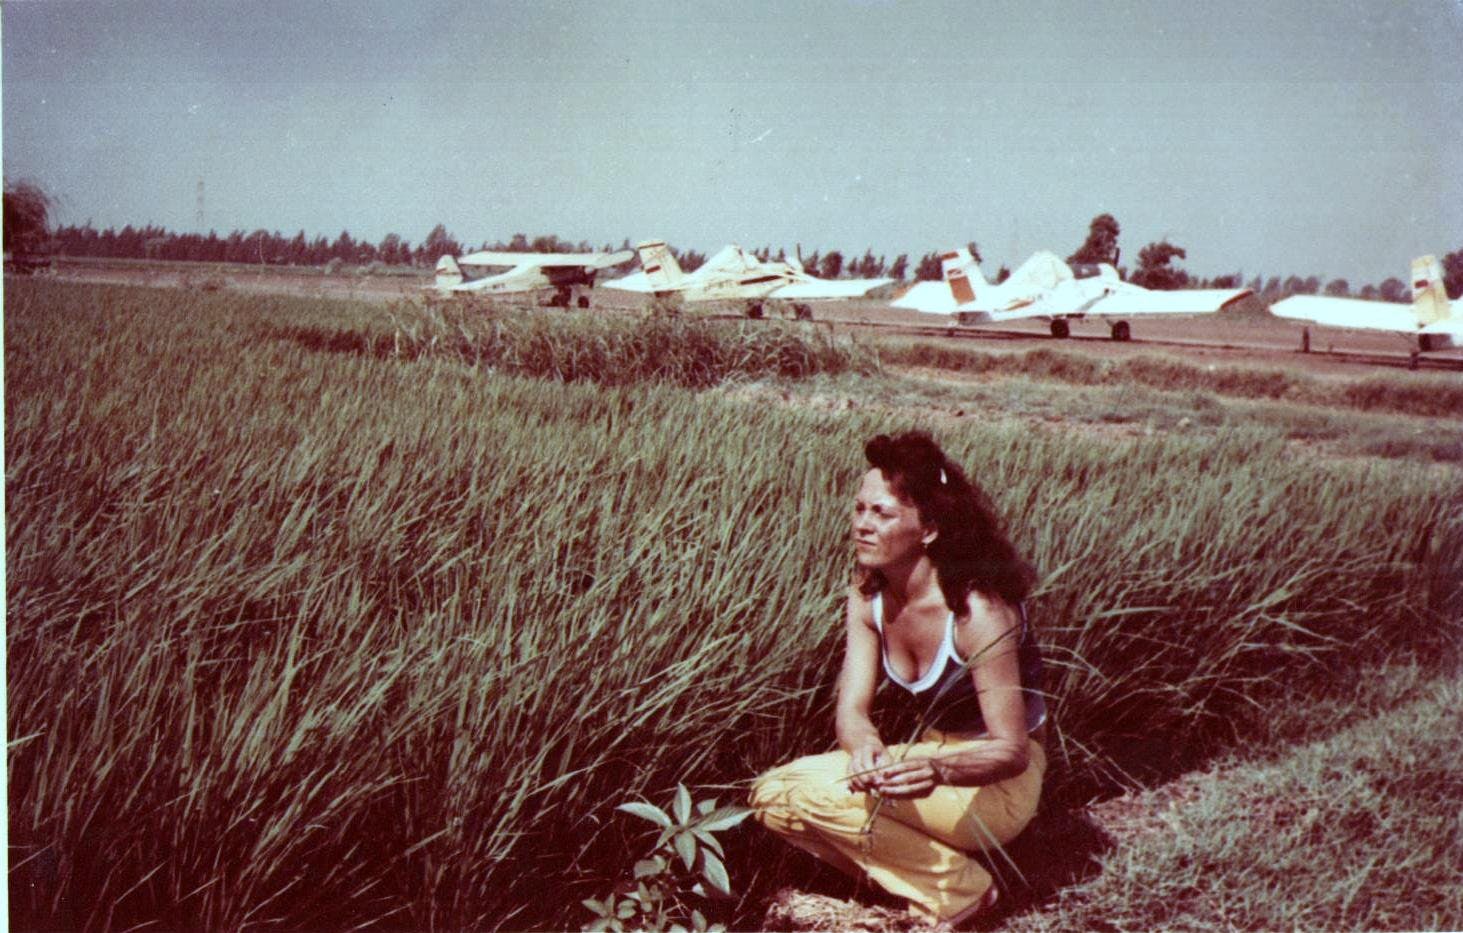 Helena Kowalska visiting her husband. In the background, Polish planes stationed at the makeshift airport.